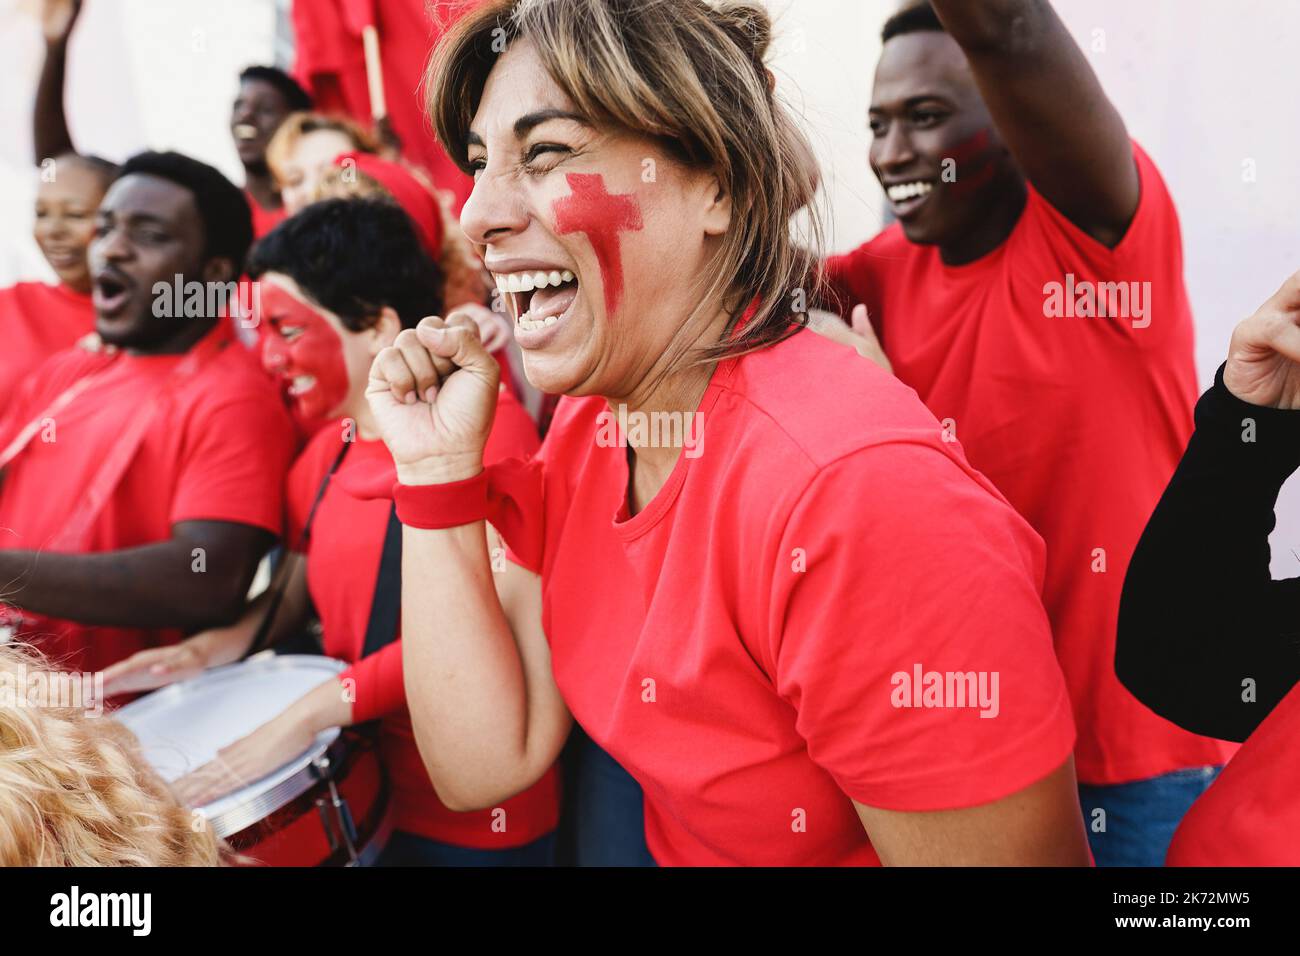 Multiracial red sport fans screaming while supporting their team - Football supporters having fun at competition event - Soft focus on latin woman fac Stock Photo